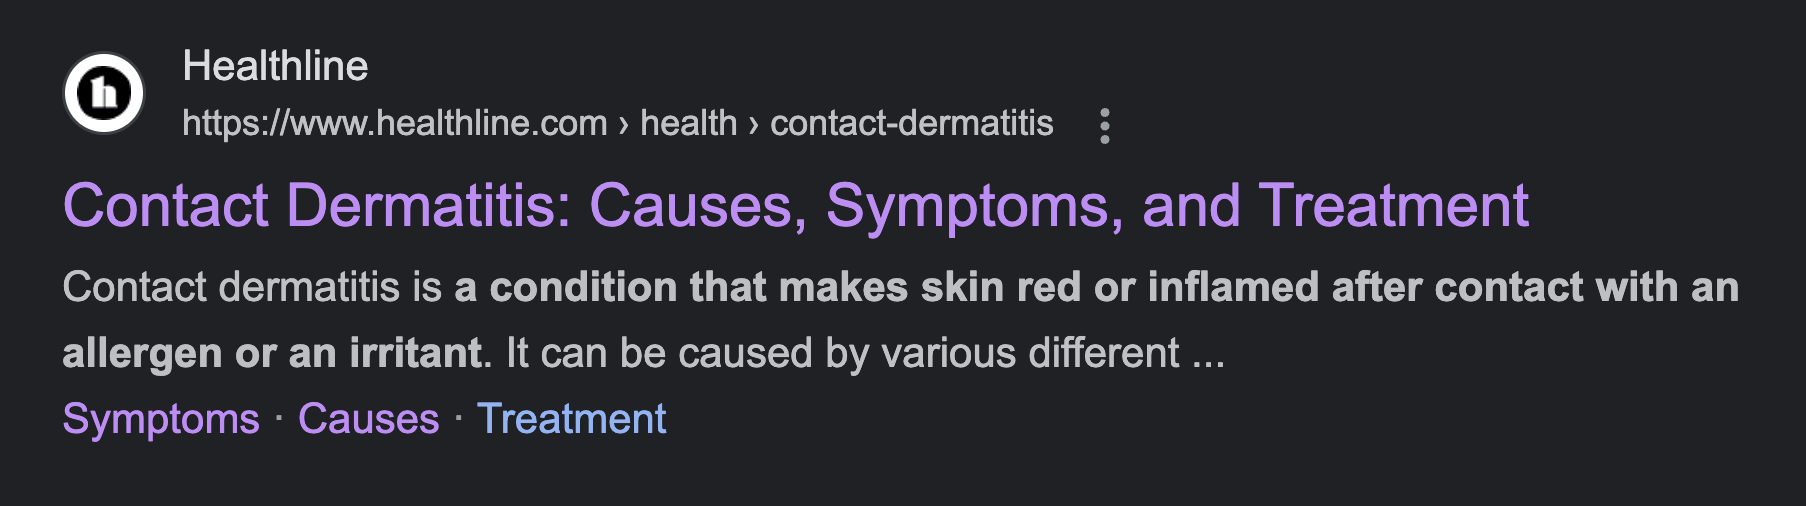 Contact dermatitis search result
